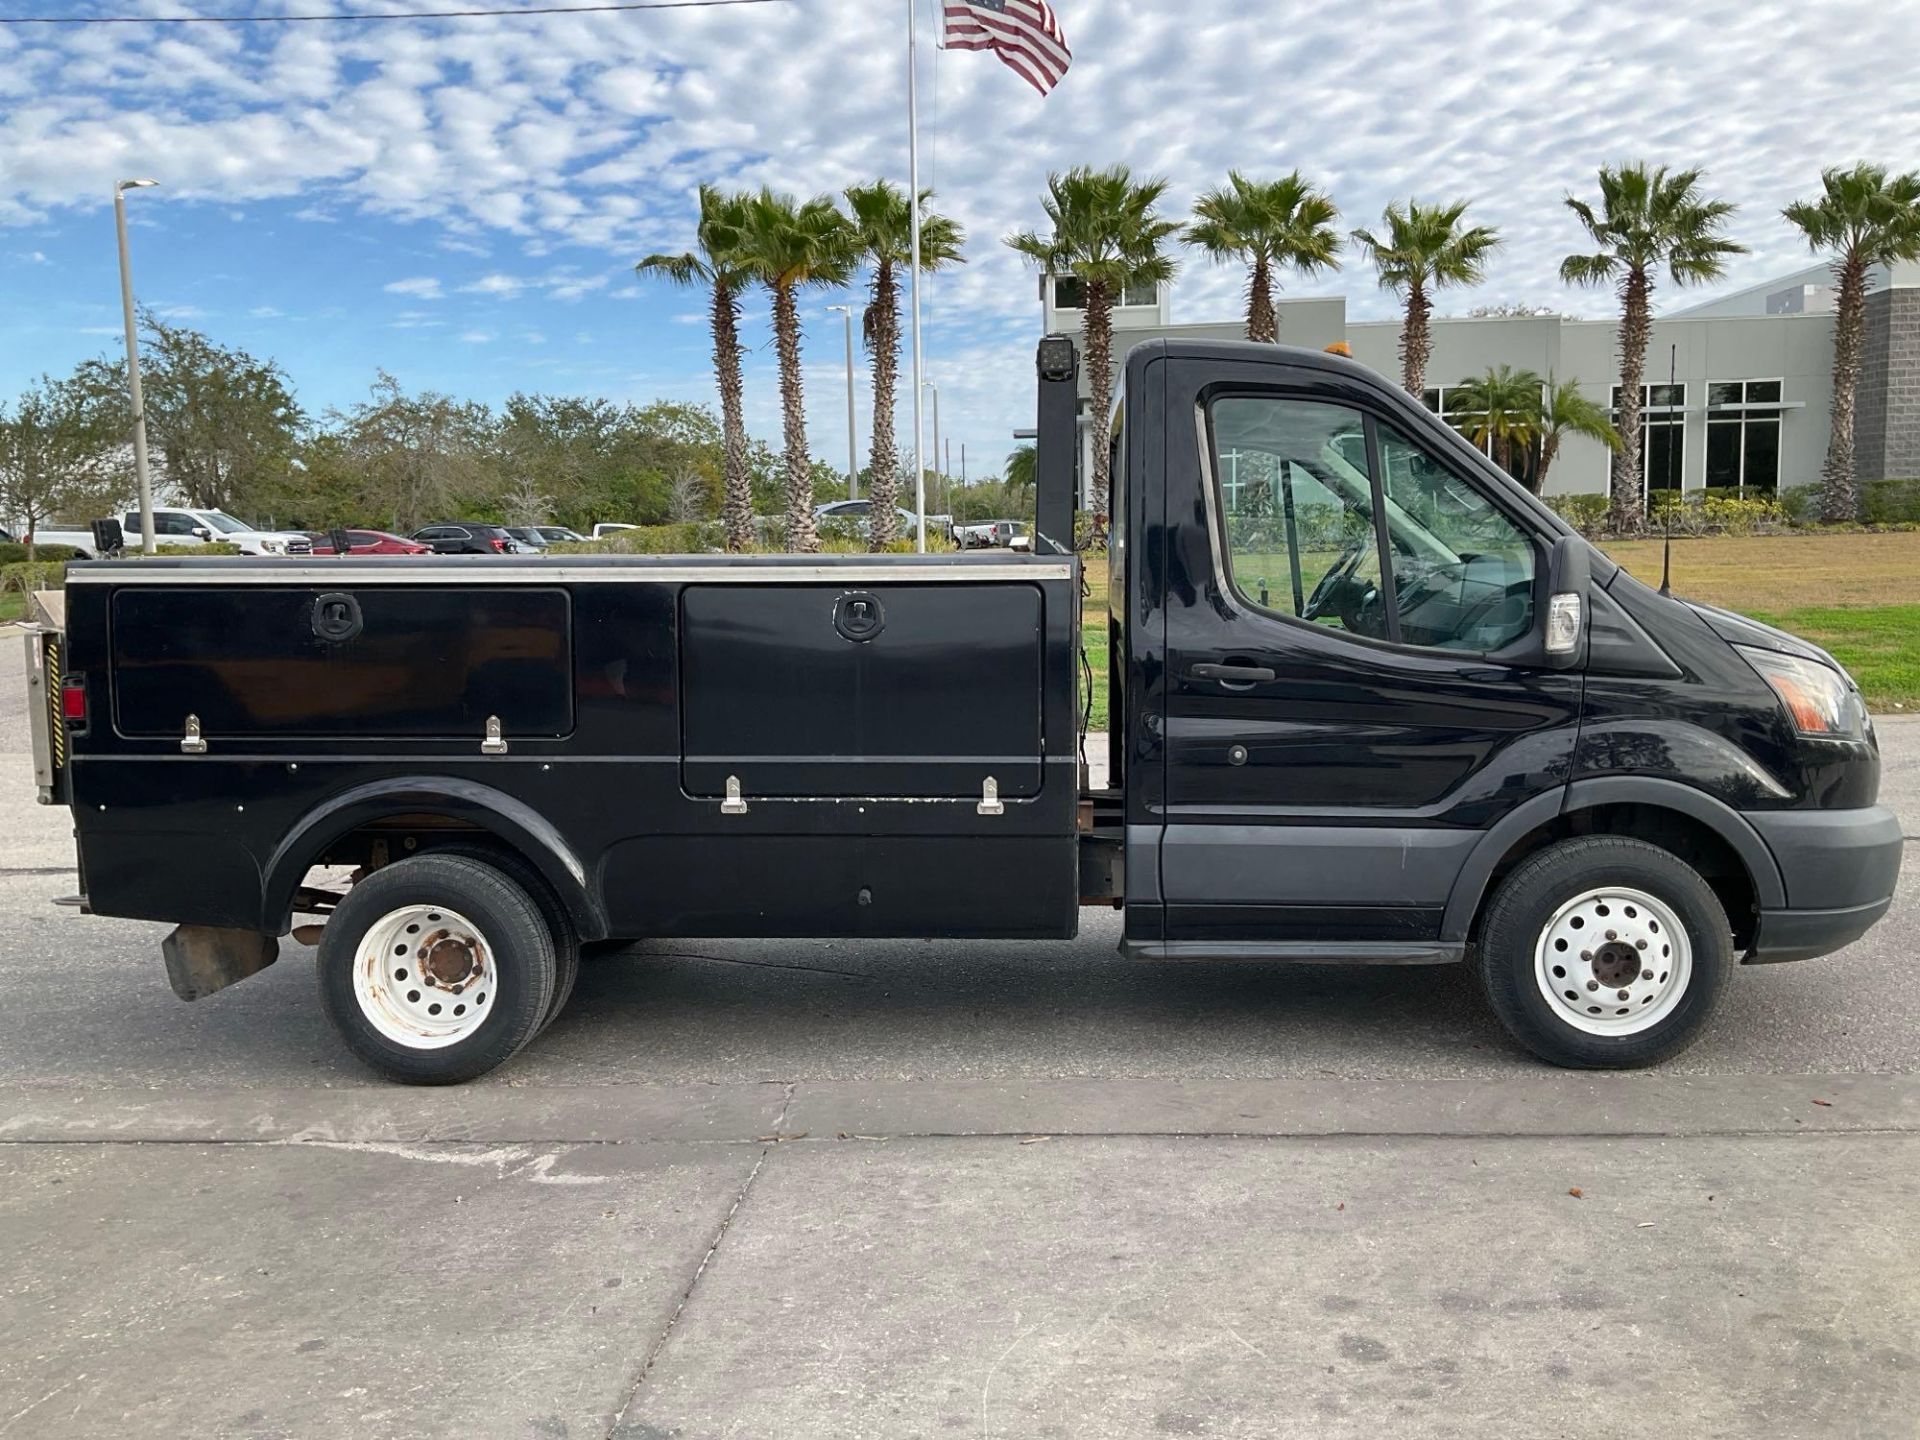 2017 FORD TRANSIT T-350 HD DRW UTILITY TRUCK , GAS POWERED AUTOMATIC, APPROX GVWR 9950LBS, STELLA... - Image 4 of 41